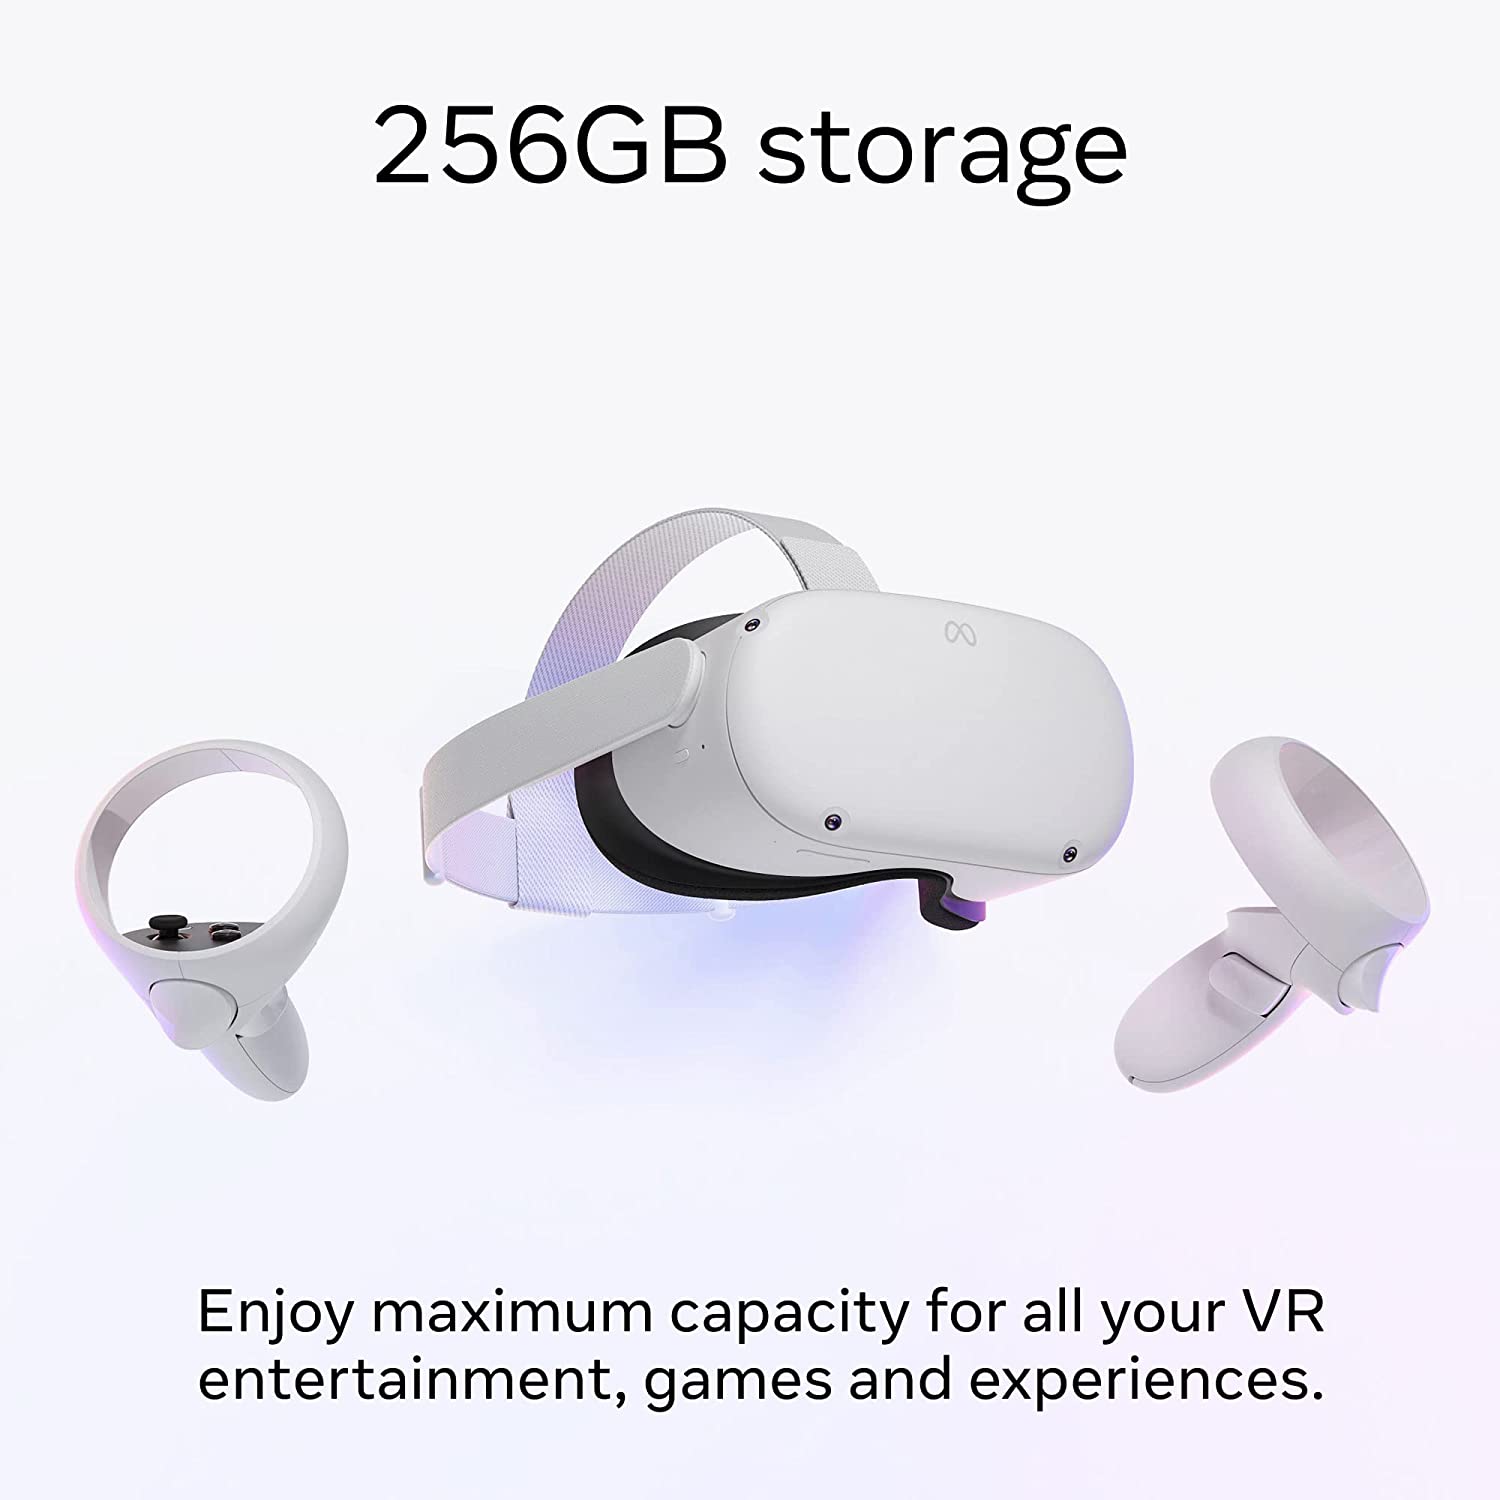 Meta Quest 2 — Advanced All-In-One Virtual Reality Headset — 256 GB Get Meta Quest 2 with GOLF+ and Space Pirate Trainer DX included